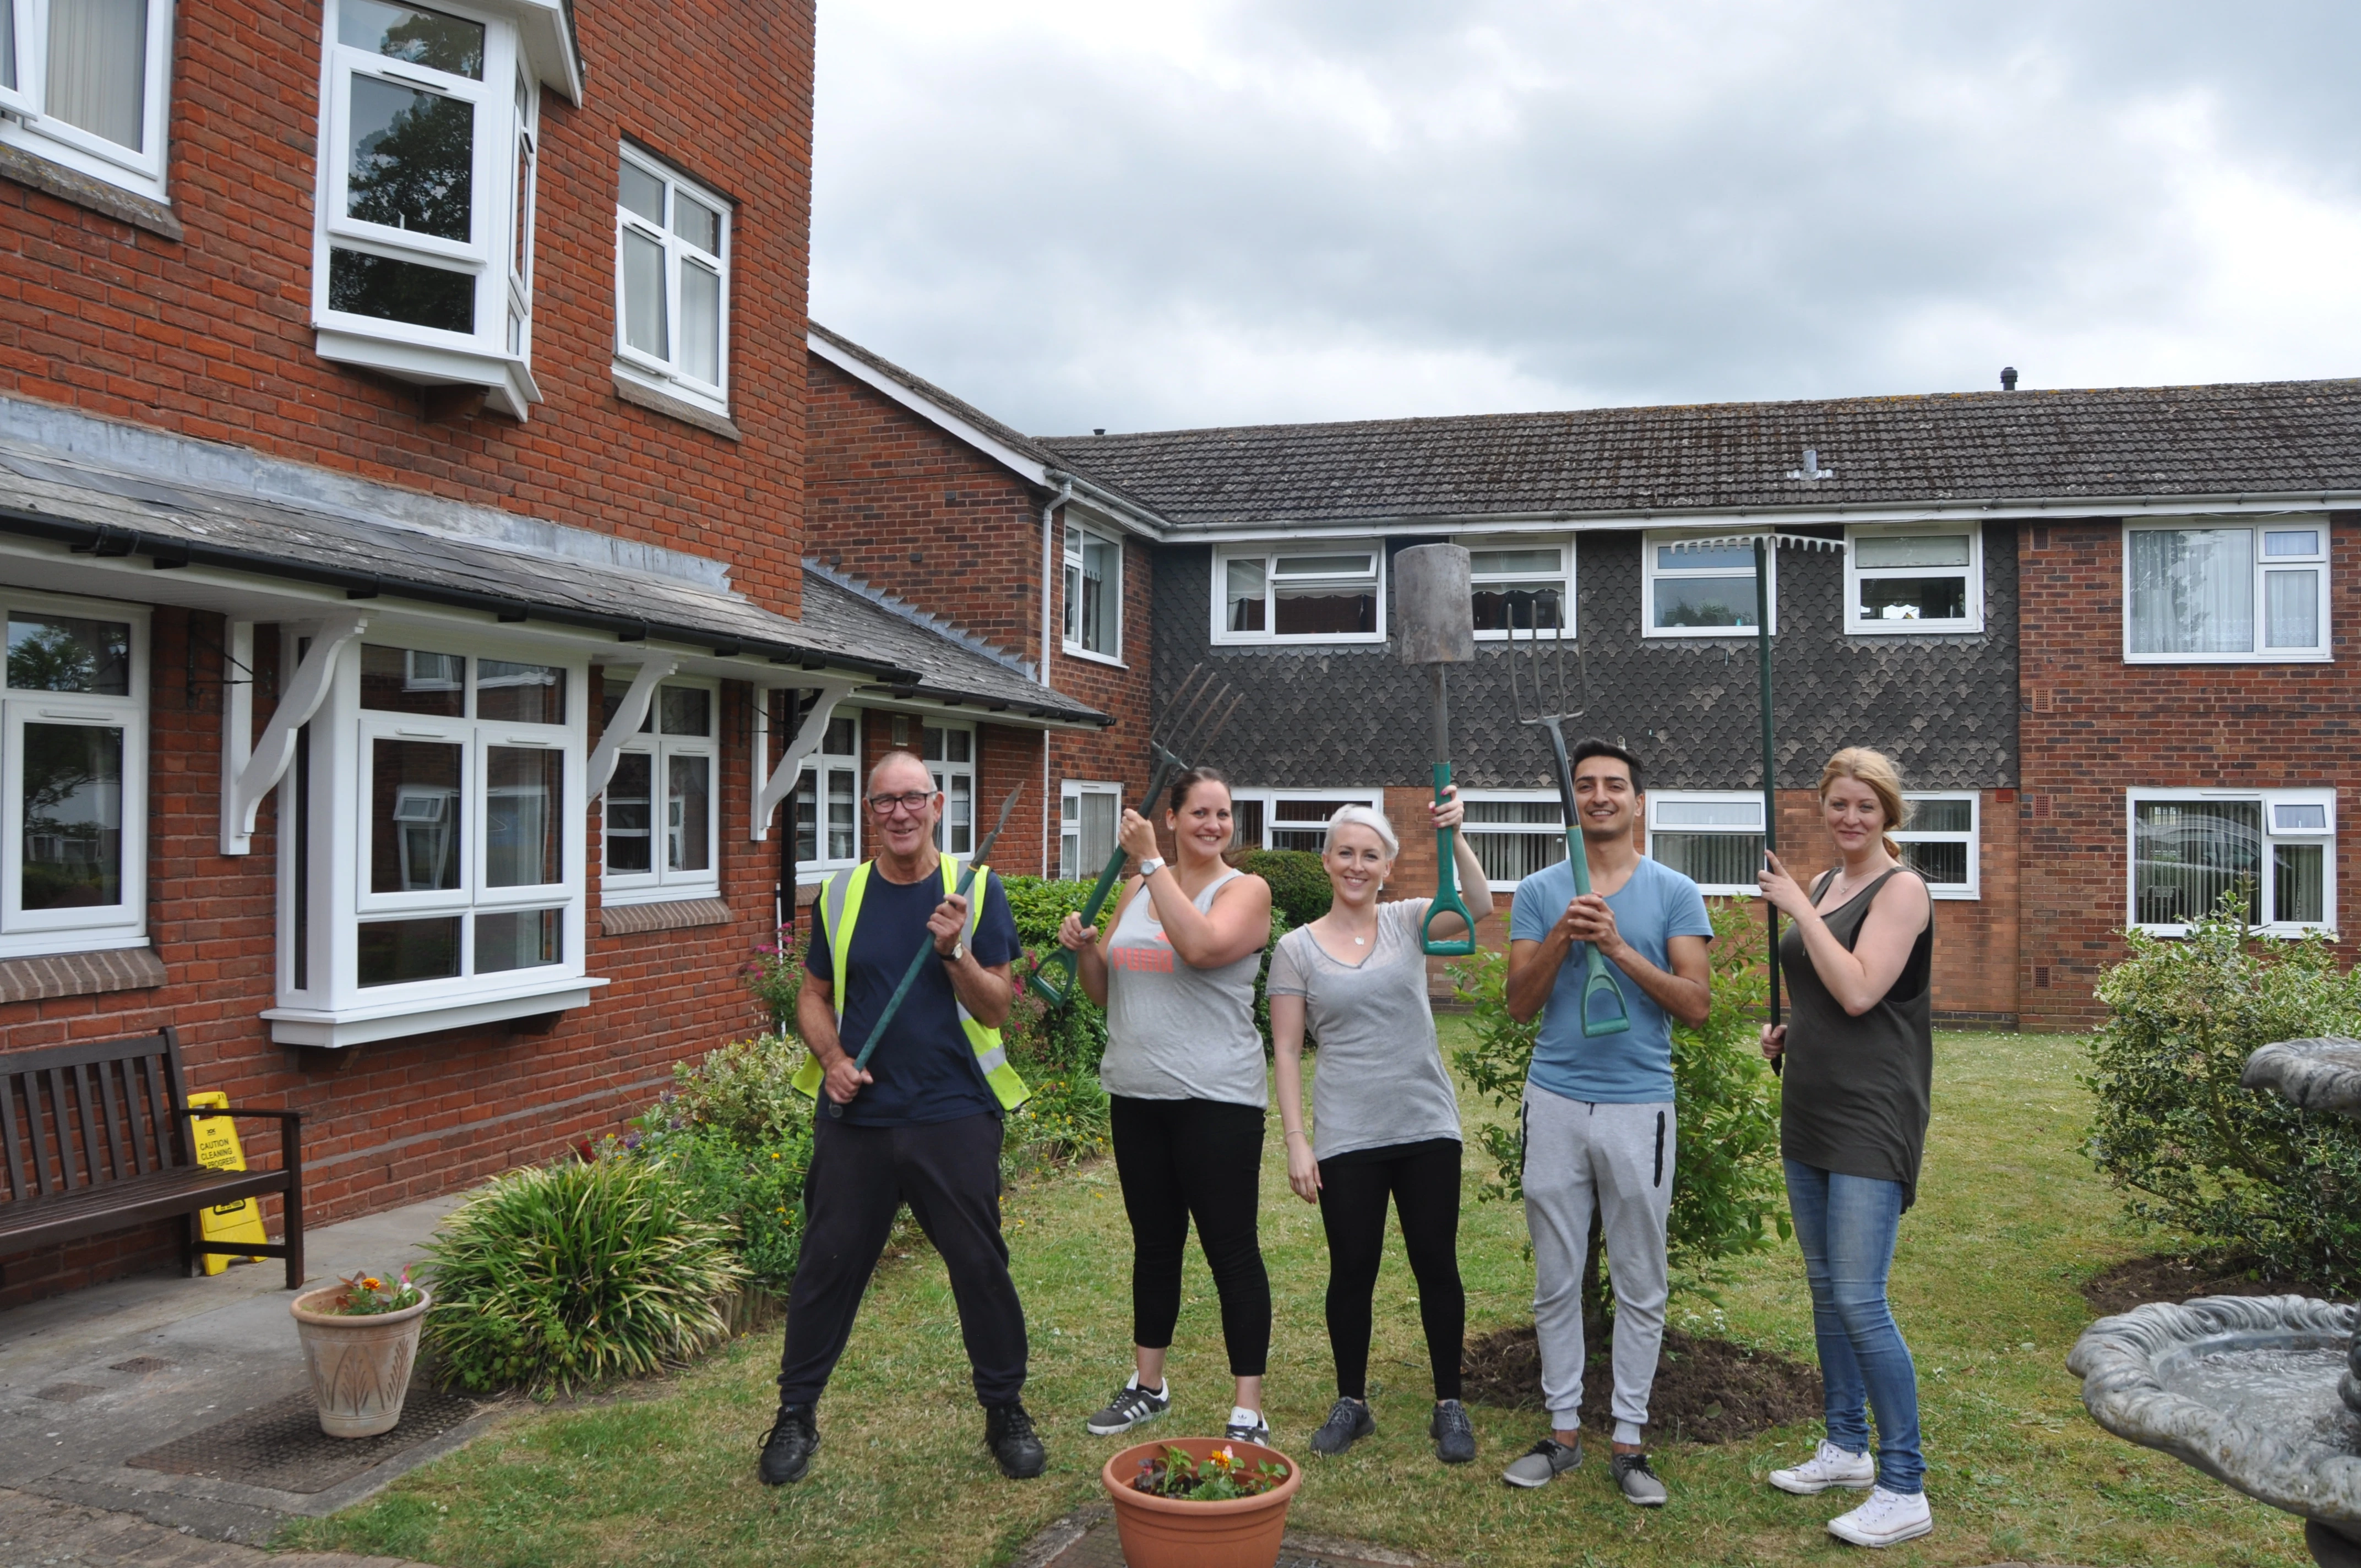 Members of the Housing Plus Group HR team turn gardeners for the day